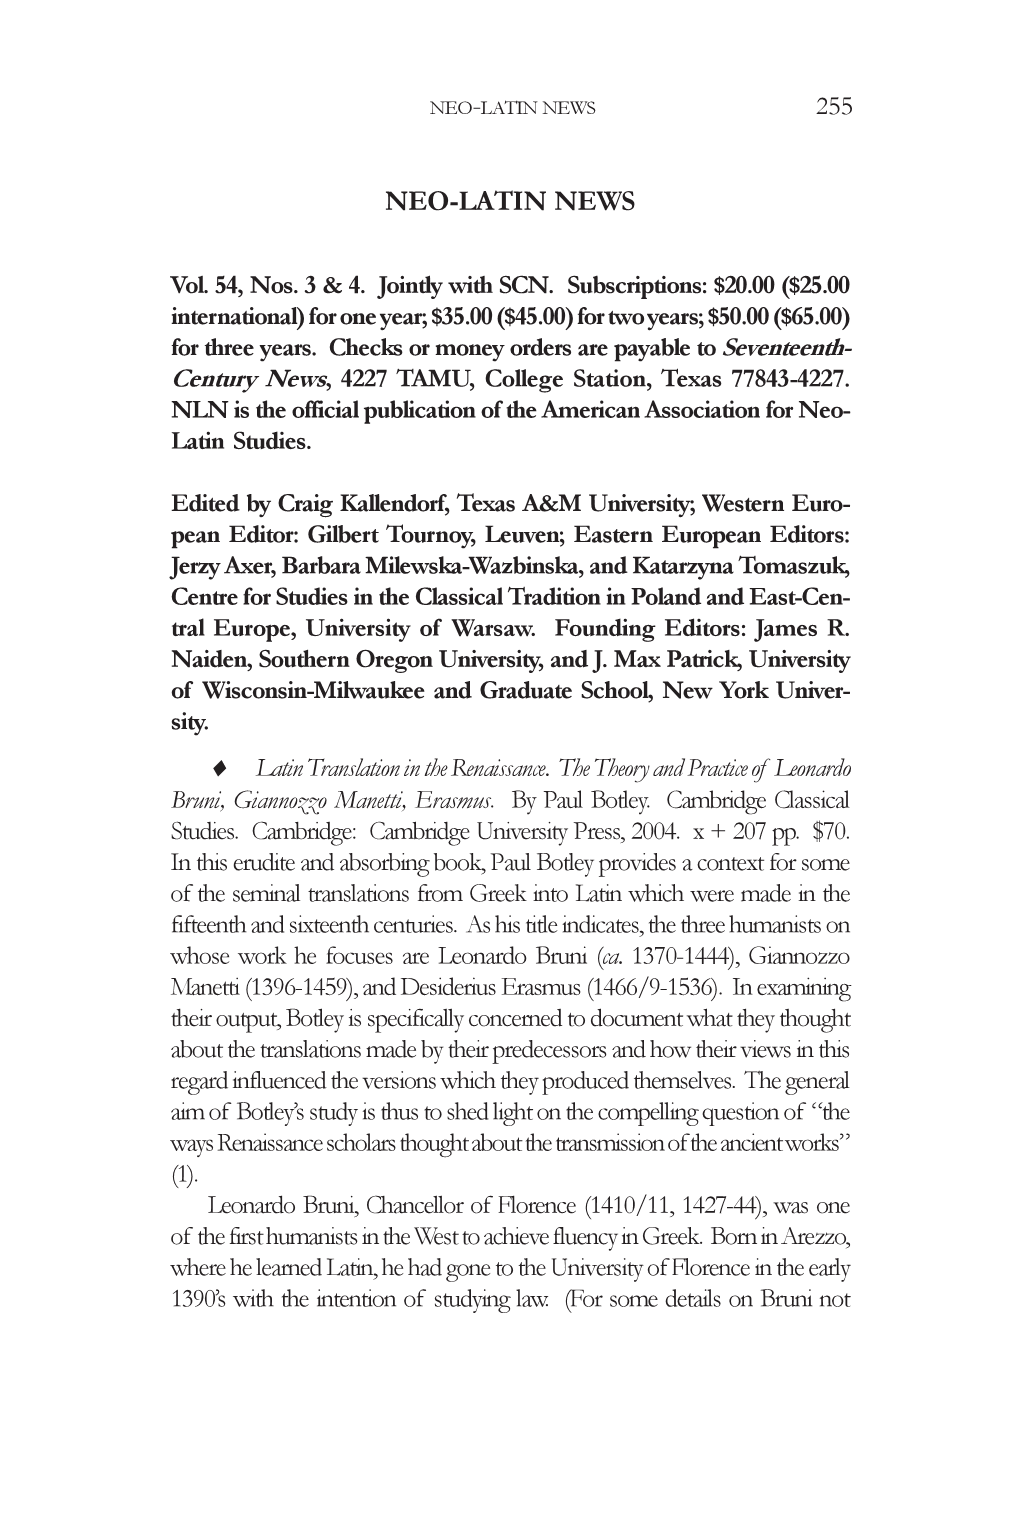 Text for Some of the Seminal Translations from Greek Into Latin Which Were Made in the Fifteenth and Sixteenth Centuries